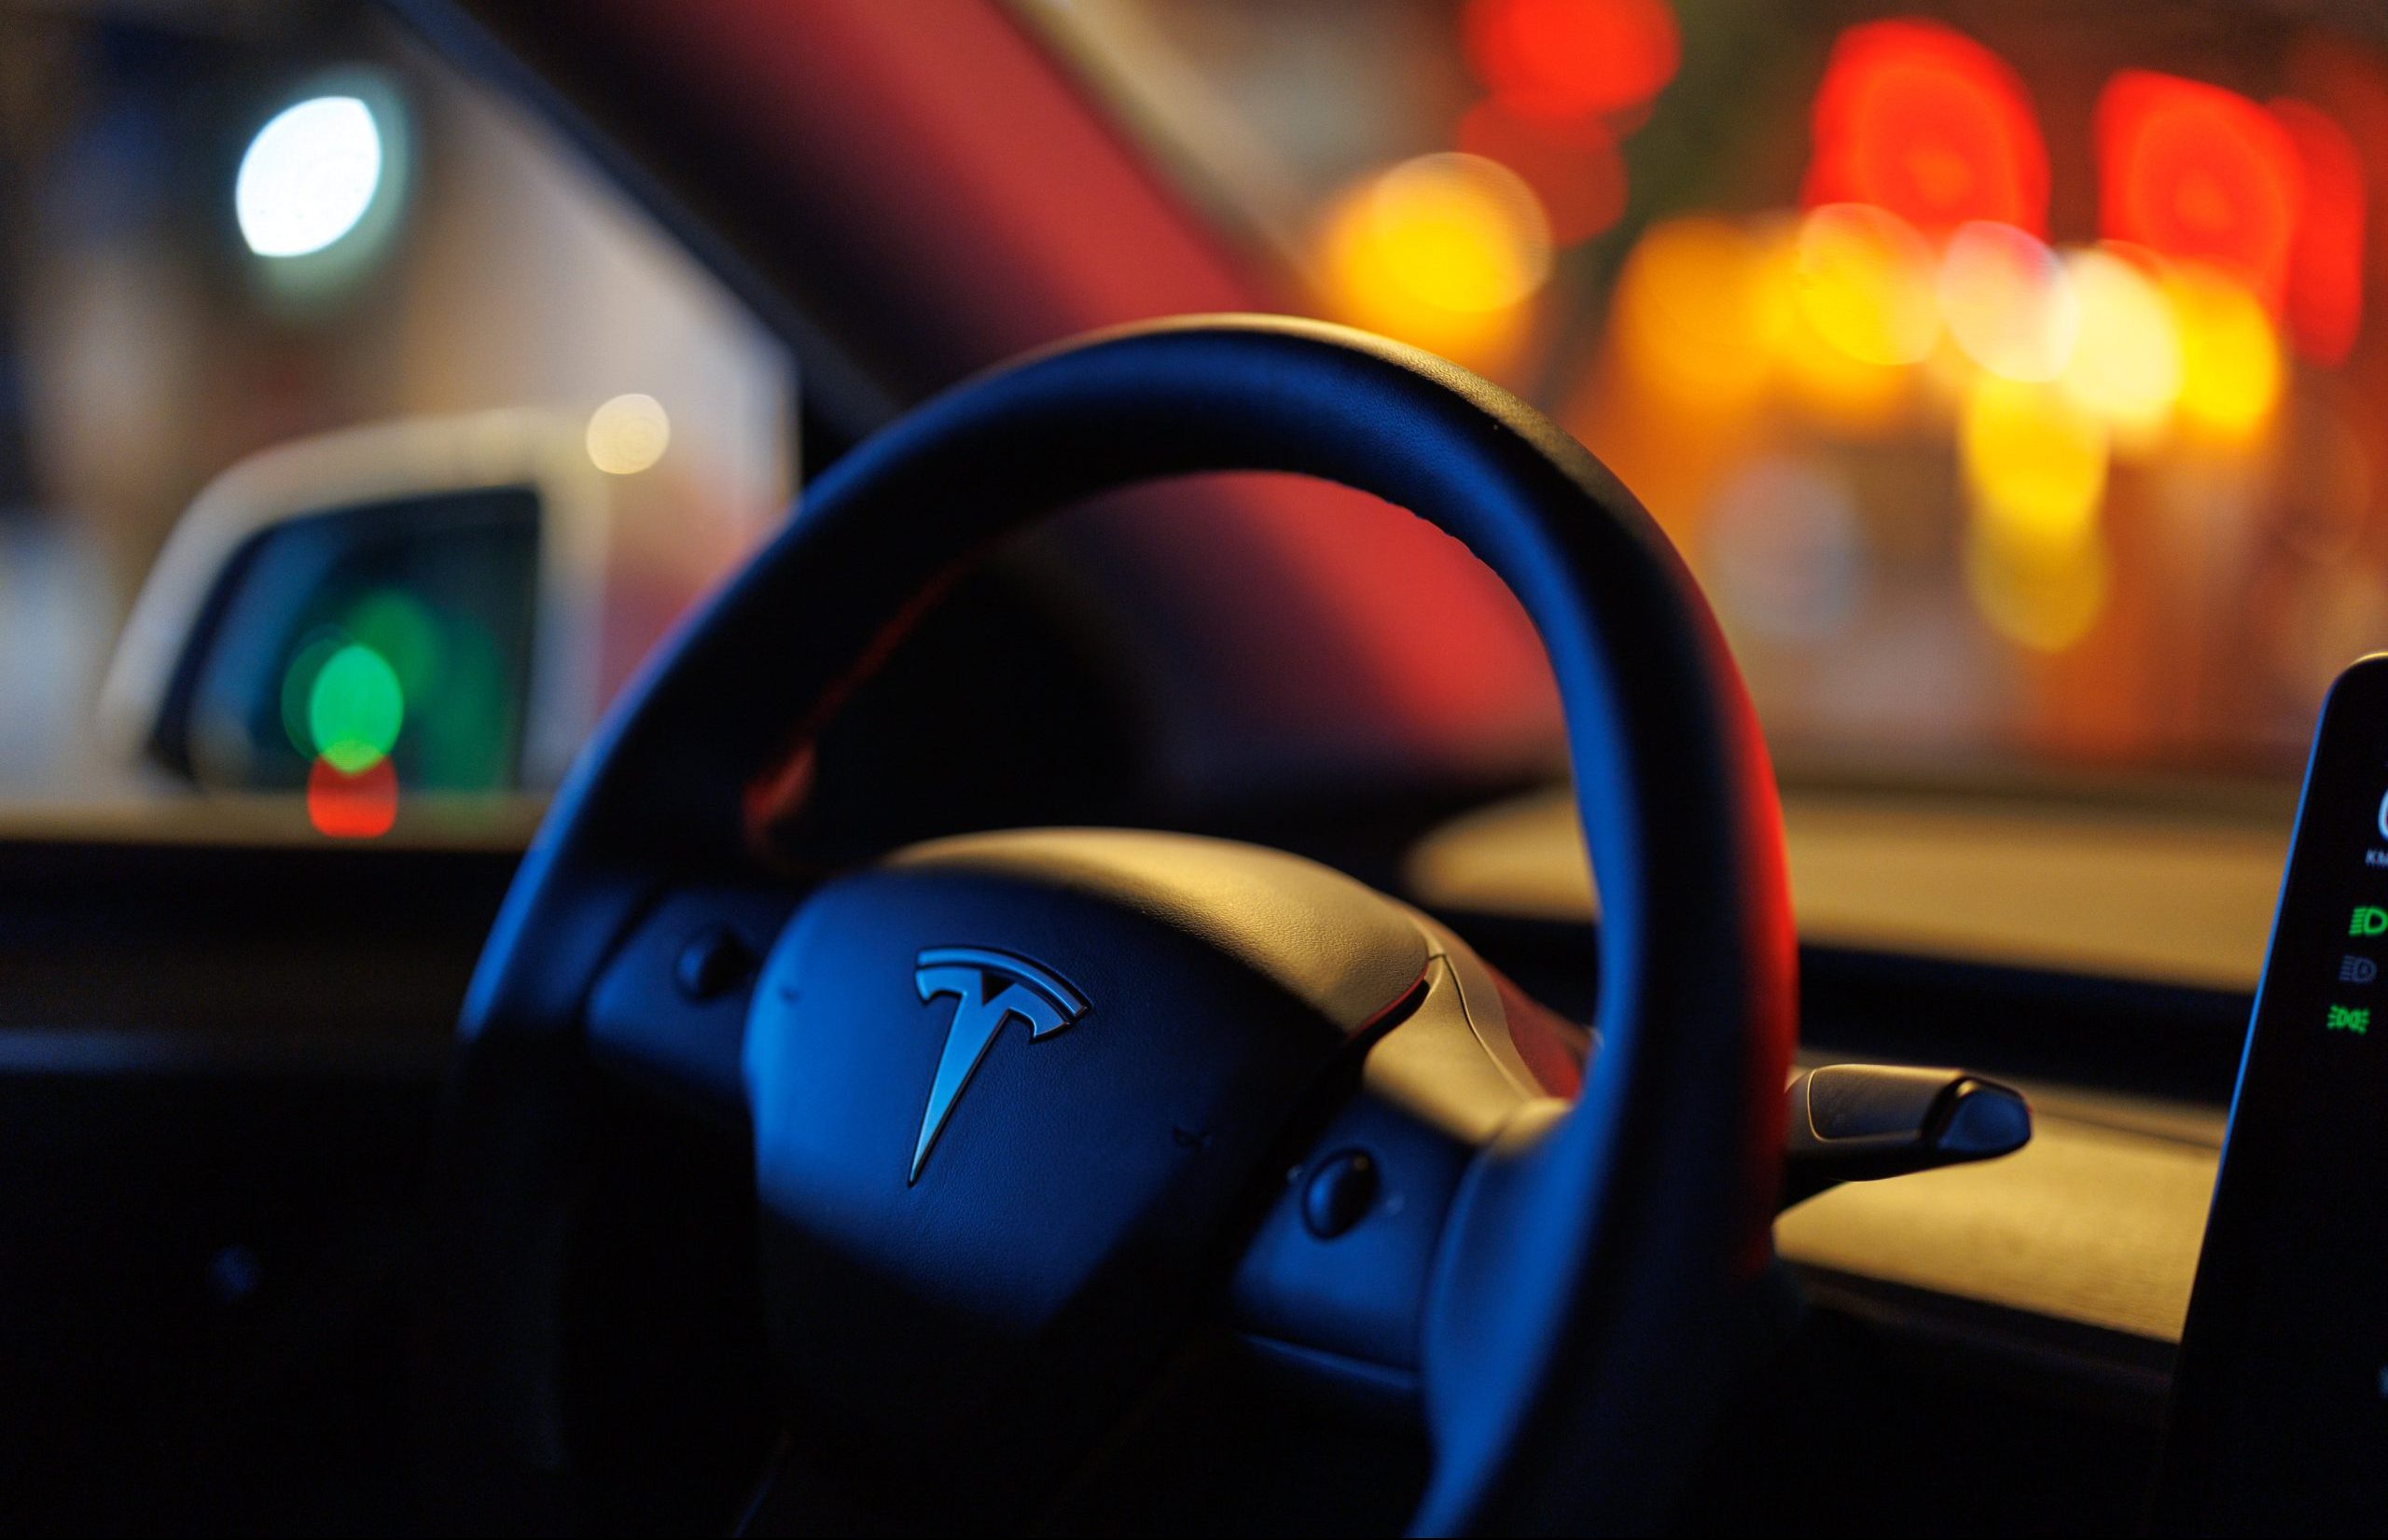 Tesla’s potential management in AI acknowledged by Goldman Sachs